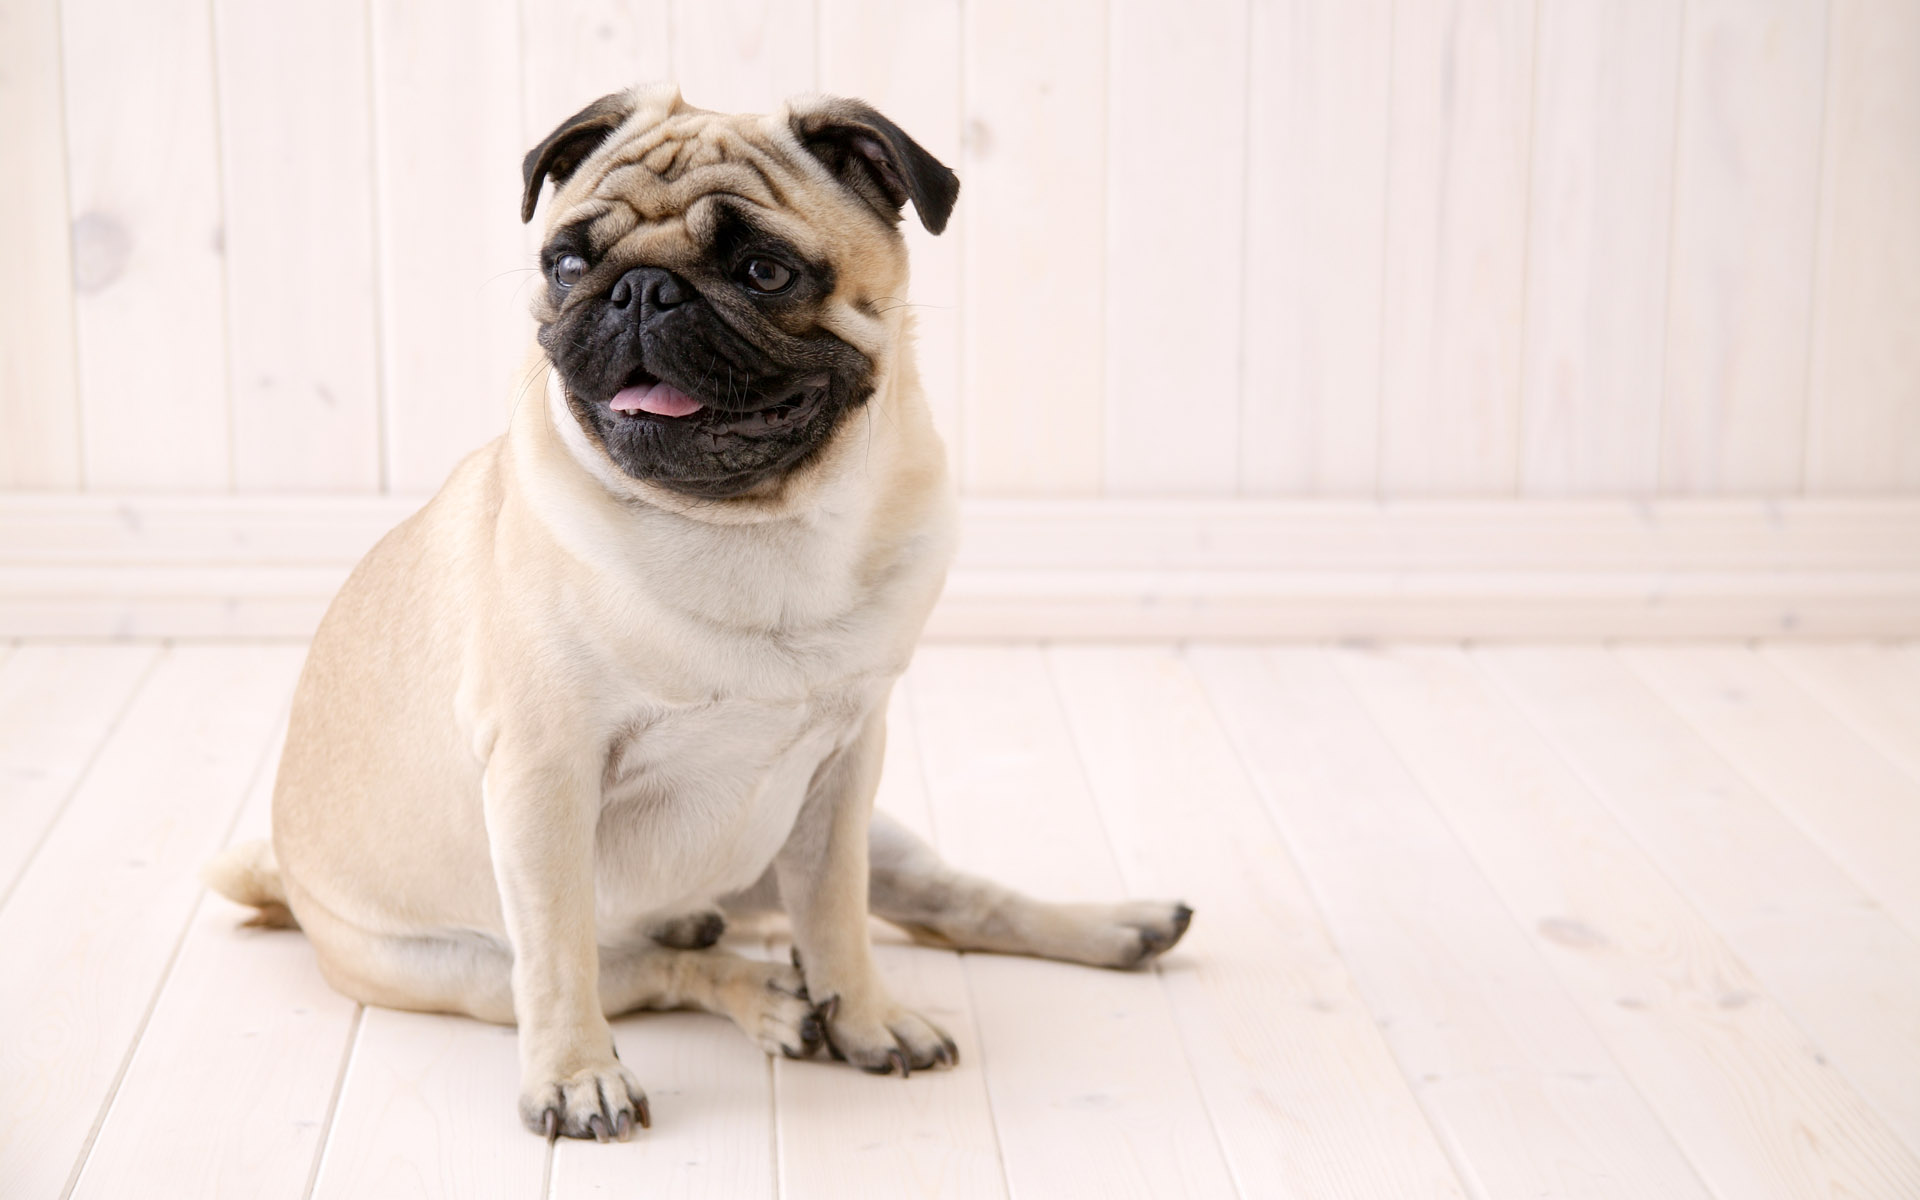 Sitting Pug Wallpaper And Image Pictures Photos